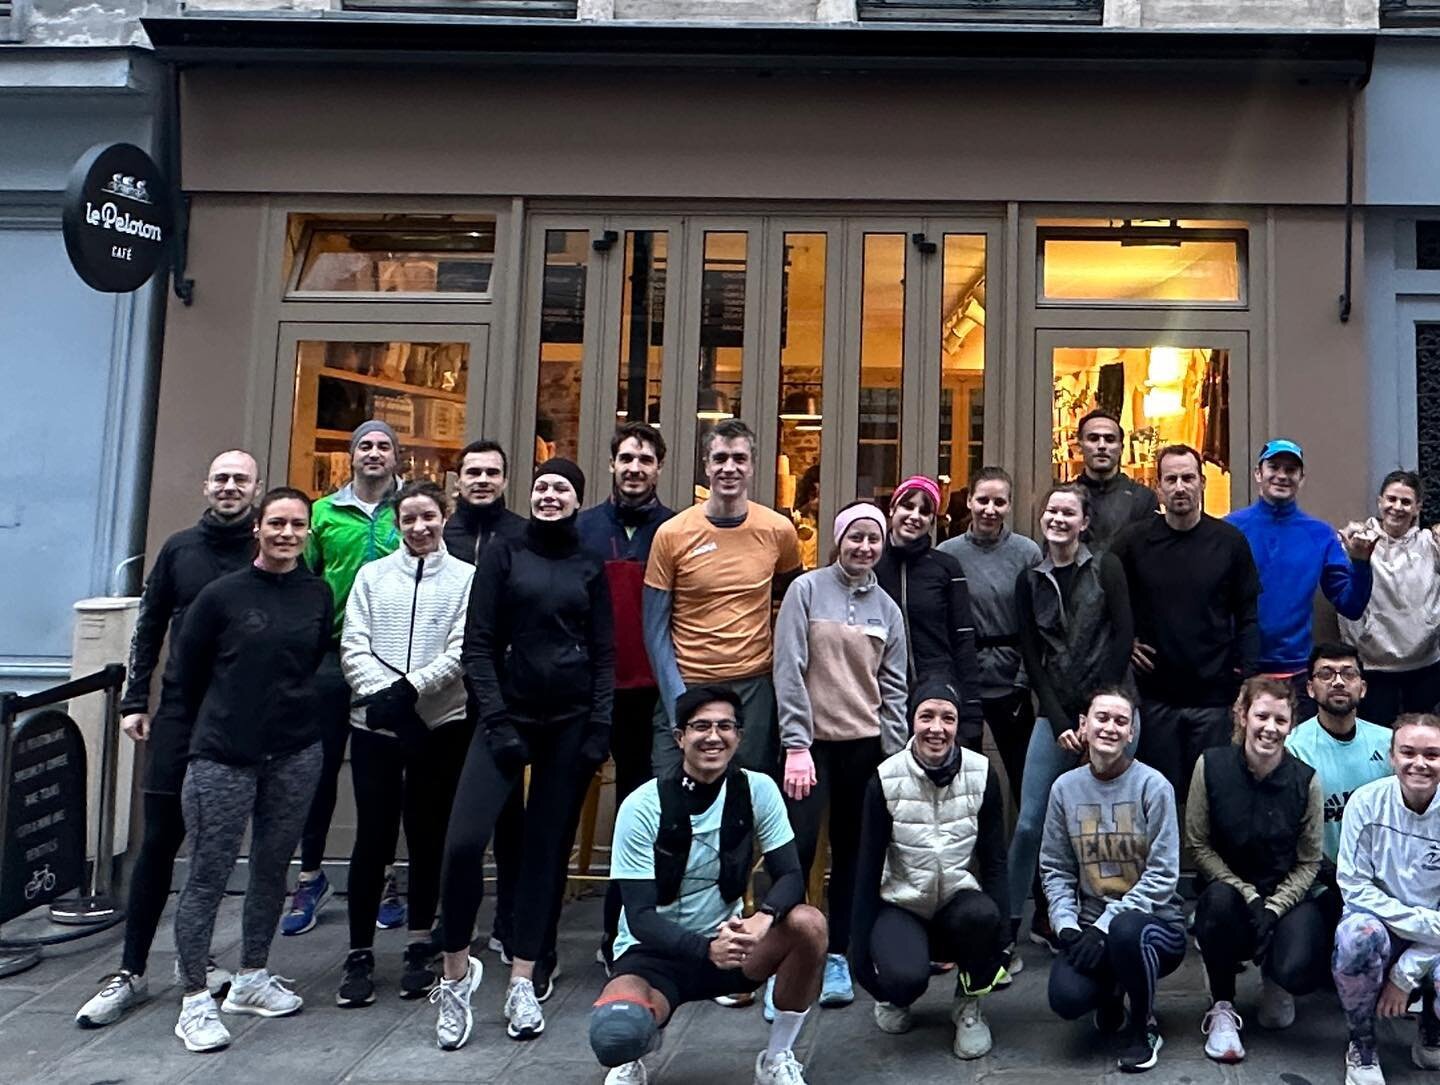 Back where we left off with less degrees 🥶 2024 race training starts already 🤟
Join us on our next run;
- Wednesday at 7am (7km) 
- Sunday at 9am (~10km)
Always from @lepelotoncafe 🤟
&bull;
&bull;
#run #running #runner #courseapied #paris #joinus 